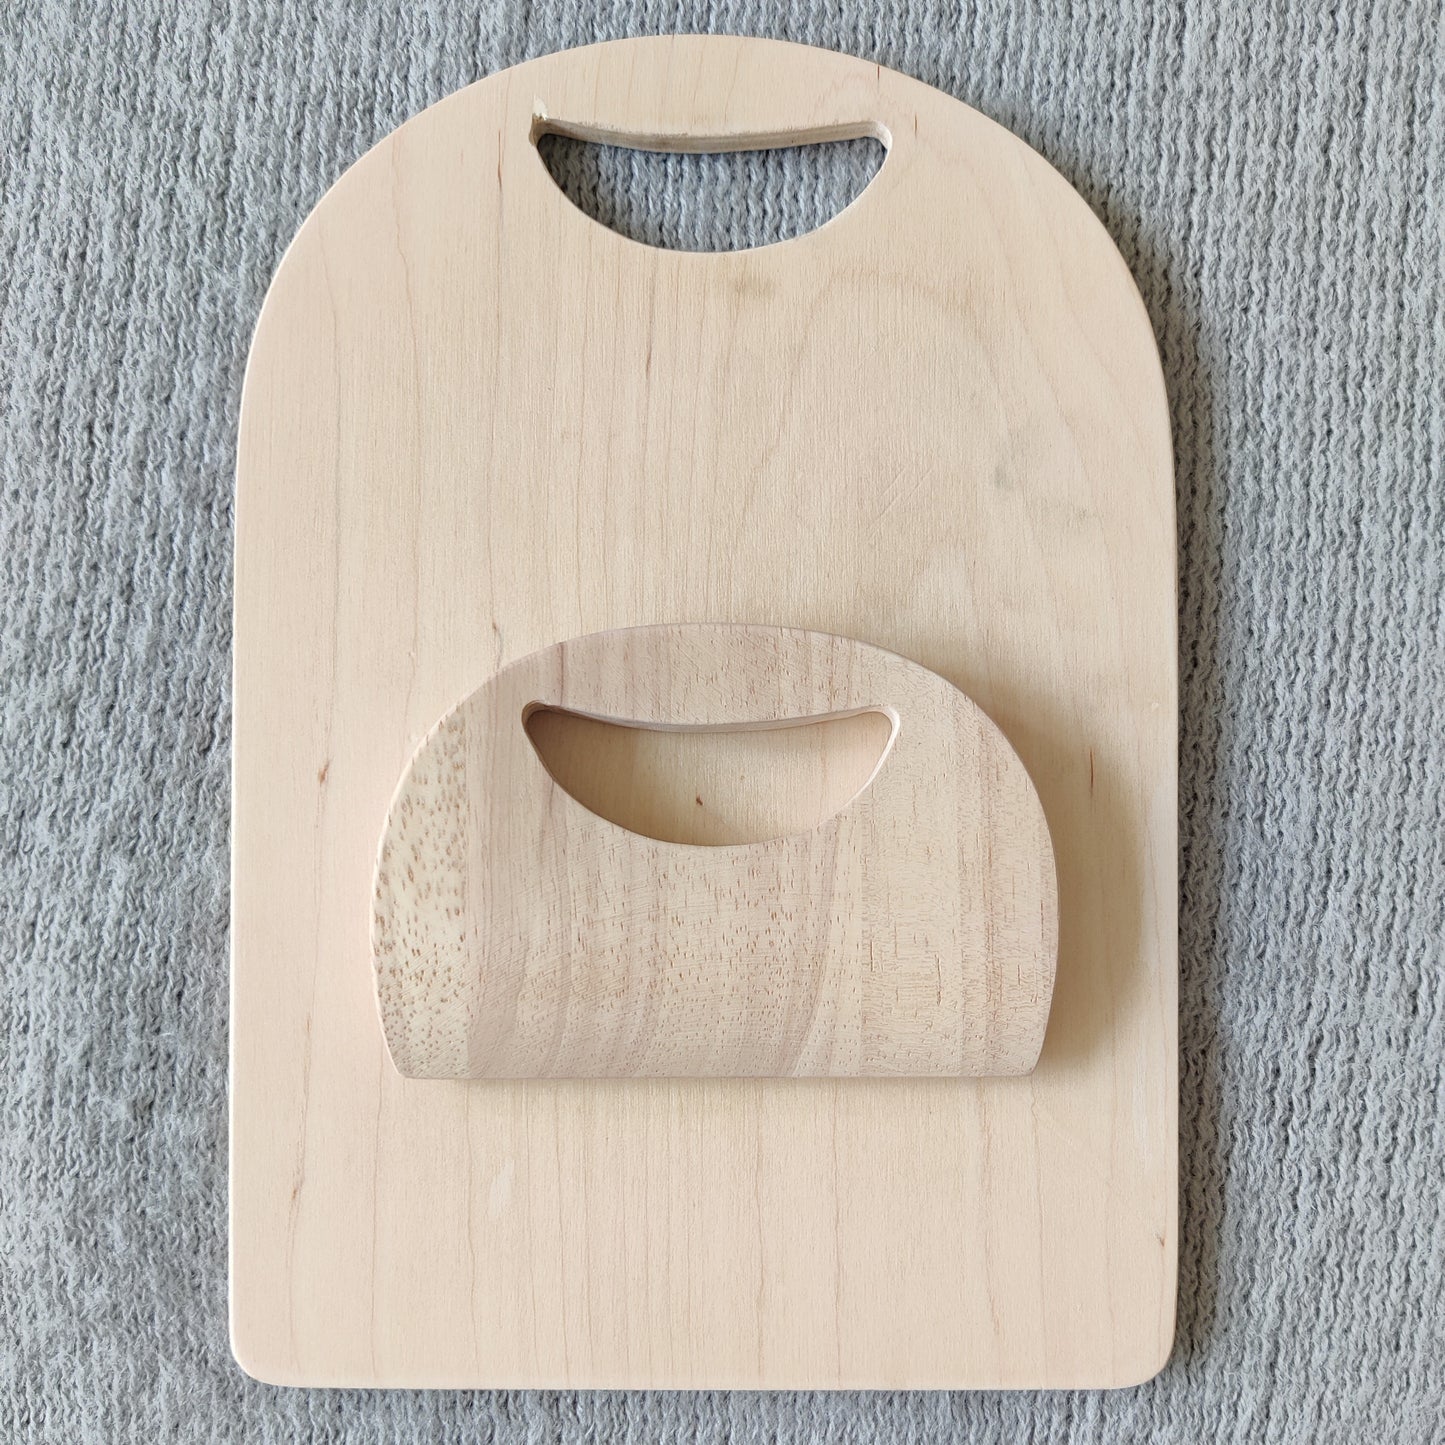 Knife Chopping Board and Lemon Squeezer